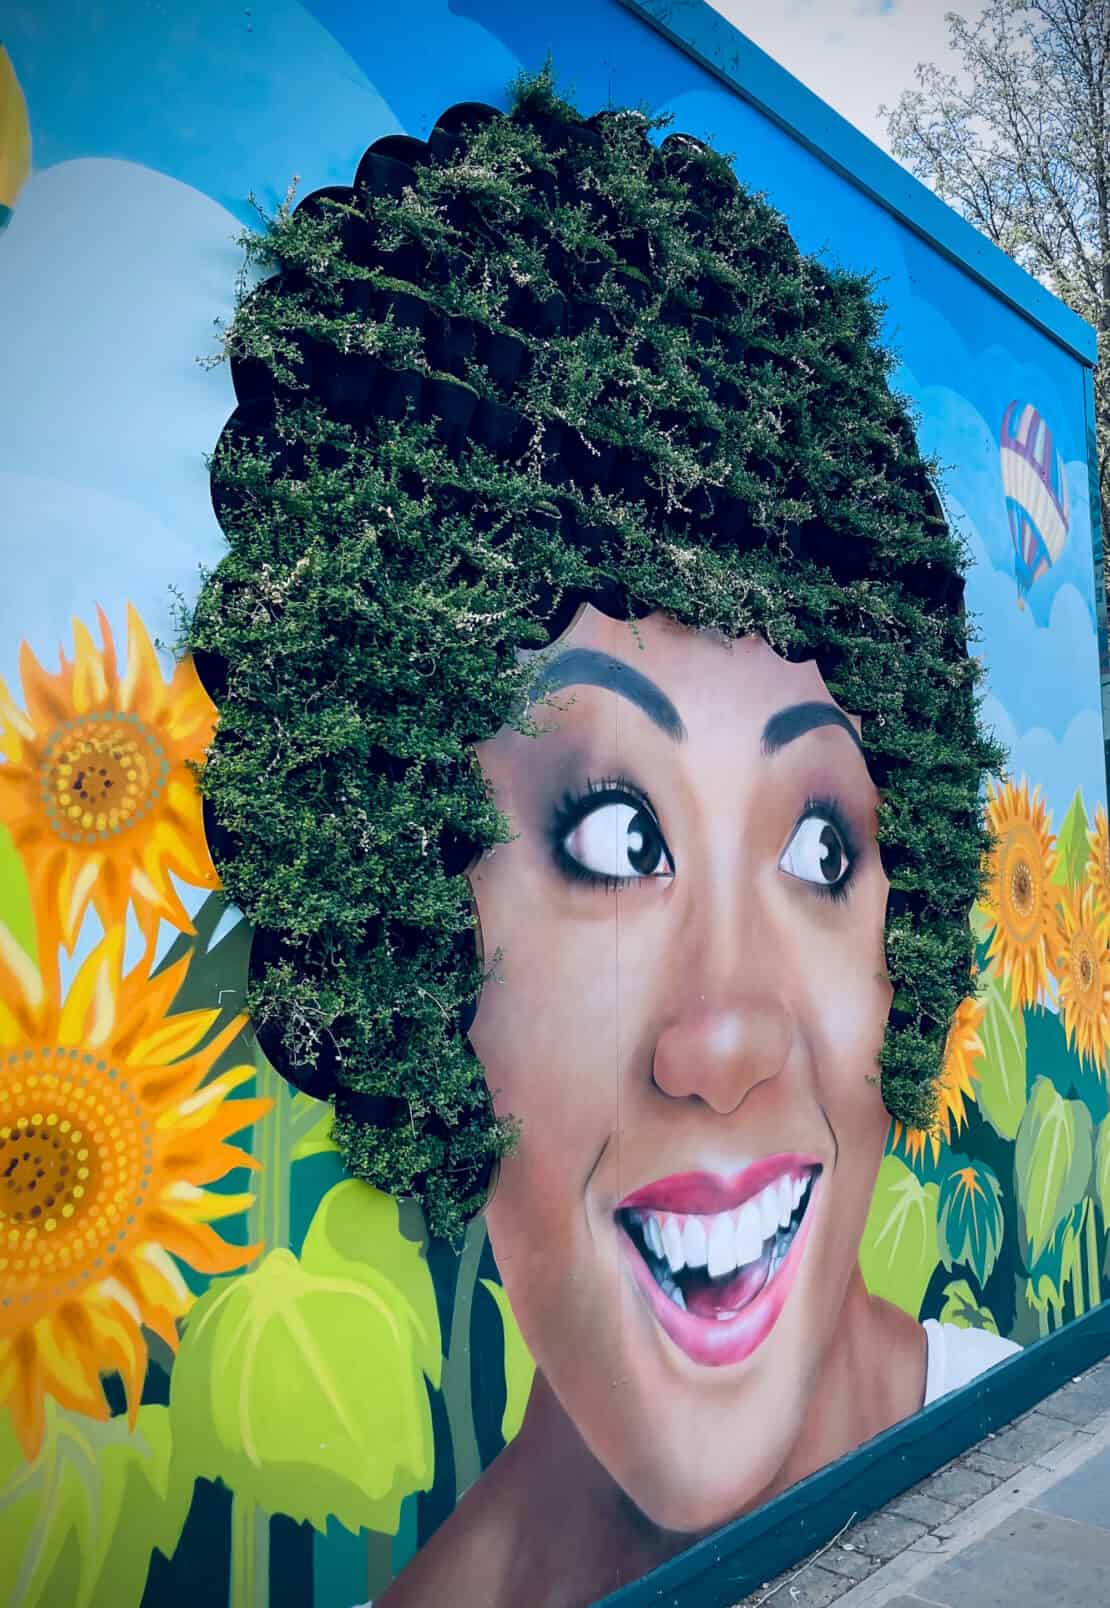 Cool street art in London where plants make up a woman's hair